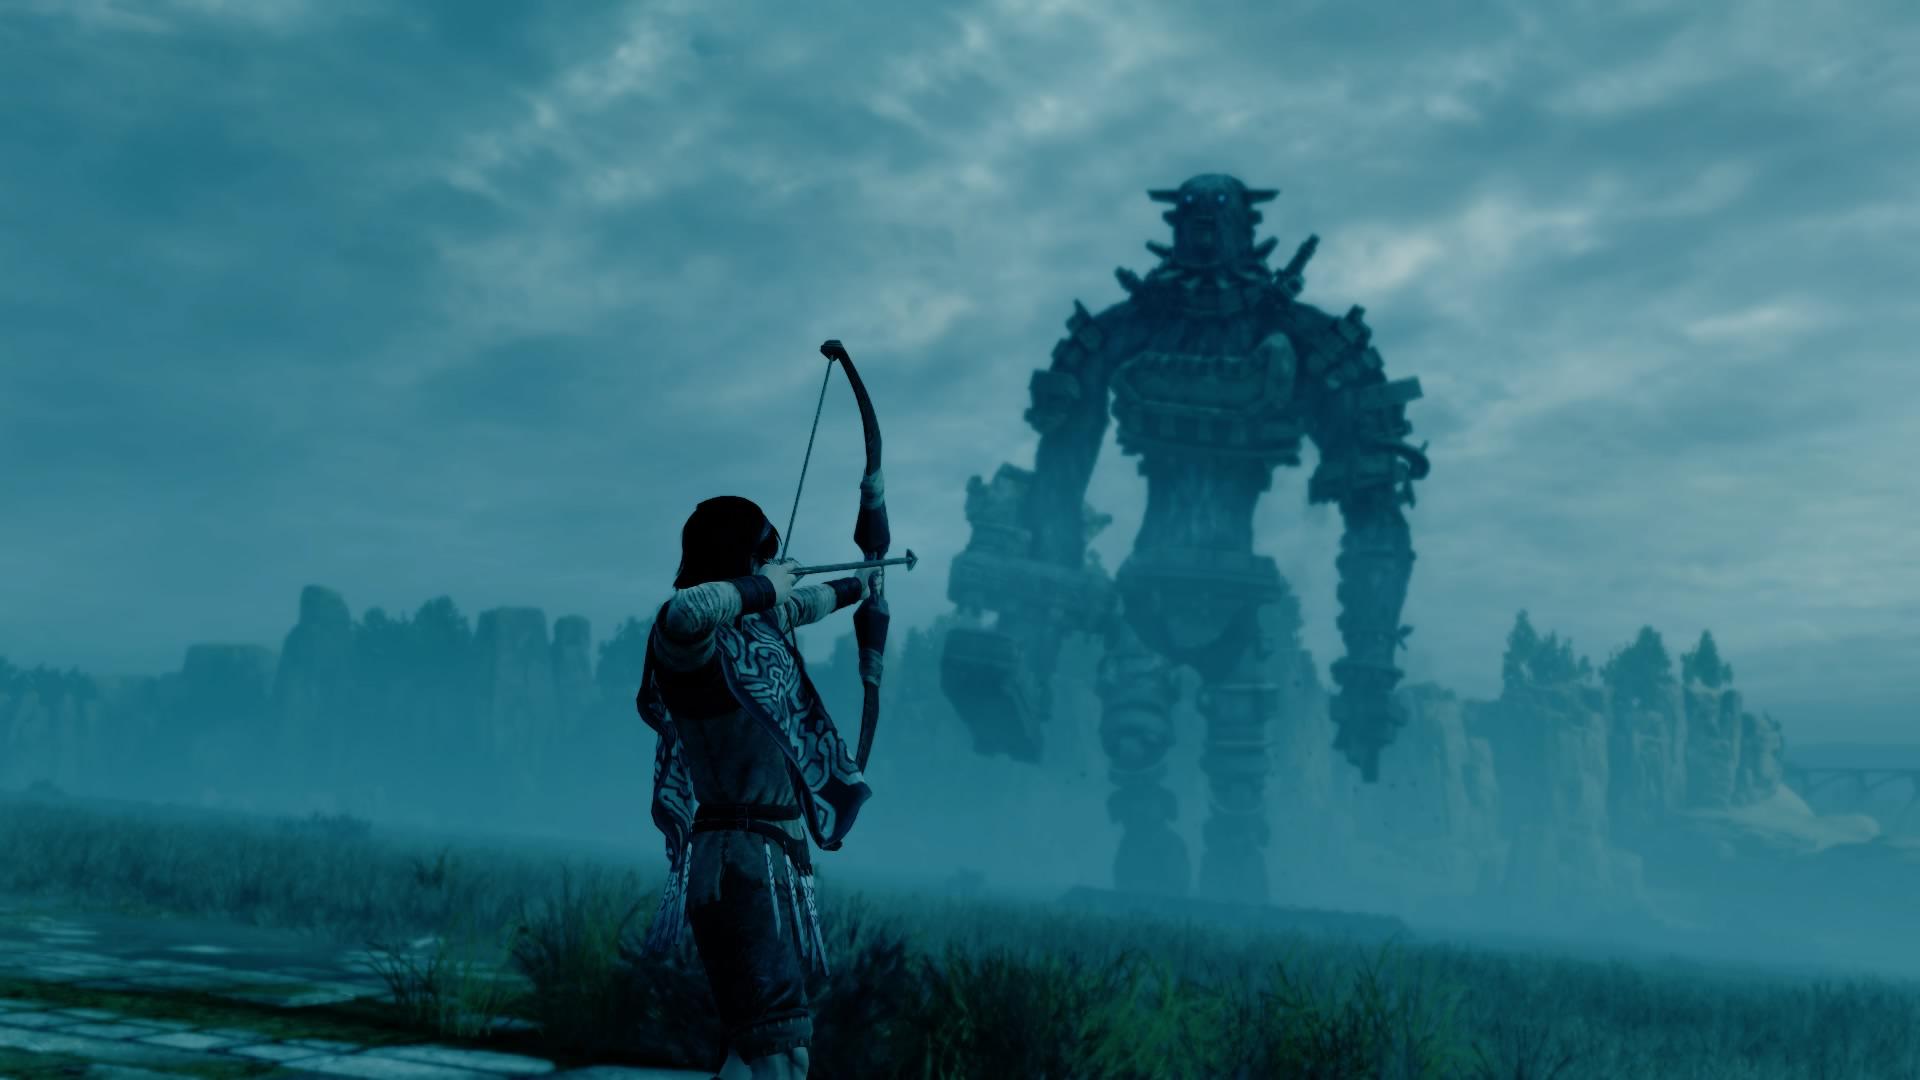 HD wallpaper, Gaius, Wander, Colossus, Shadow Of The Colossus, Video Games, Battle